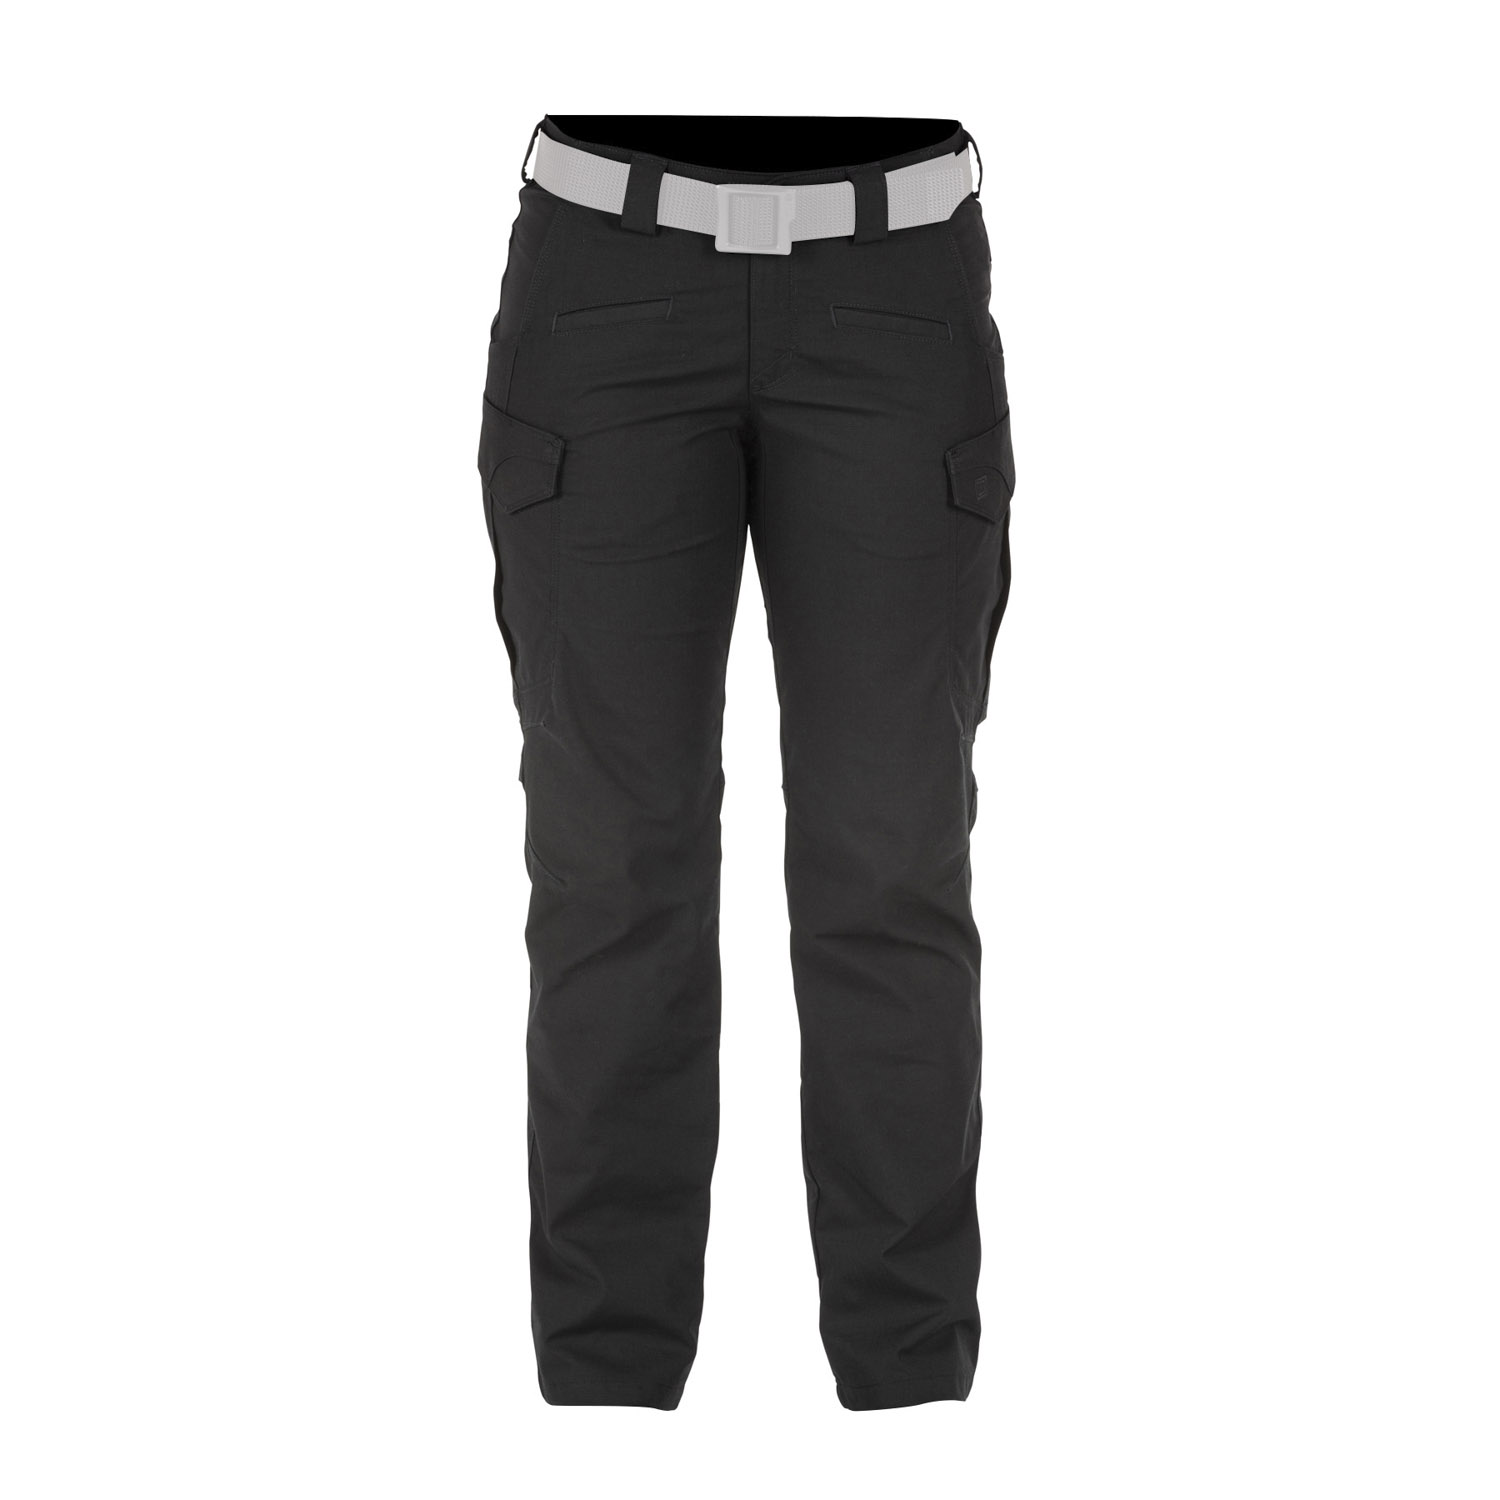 5.11 TACTICAL WOMEN'S ICON PANT